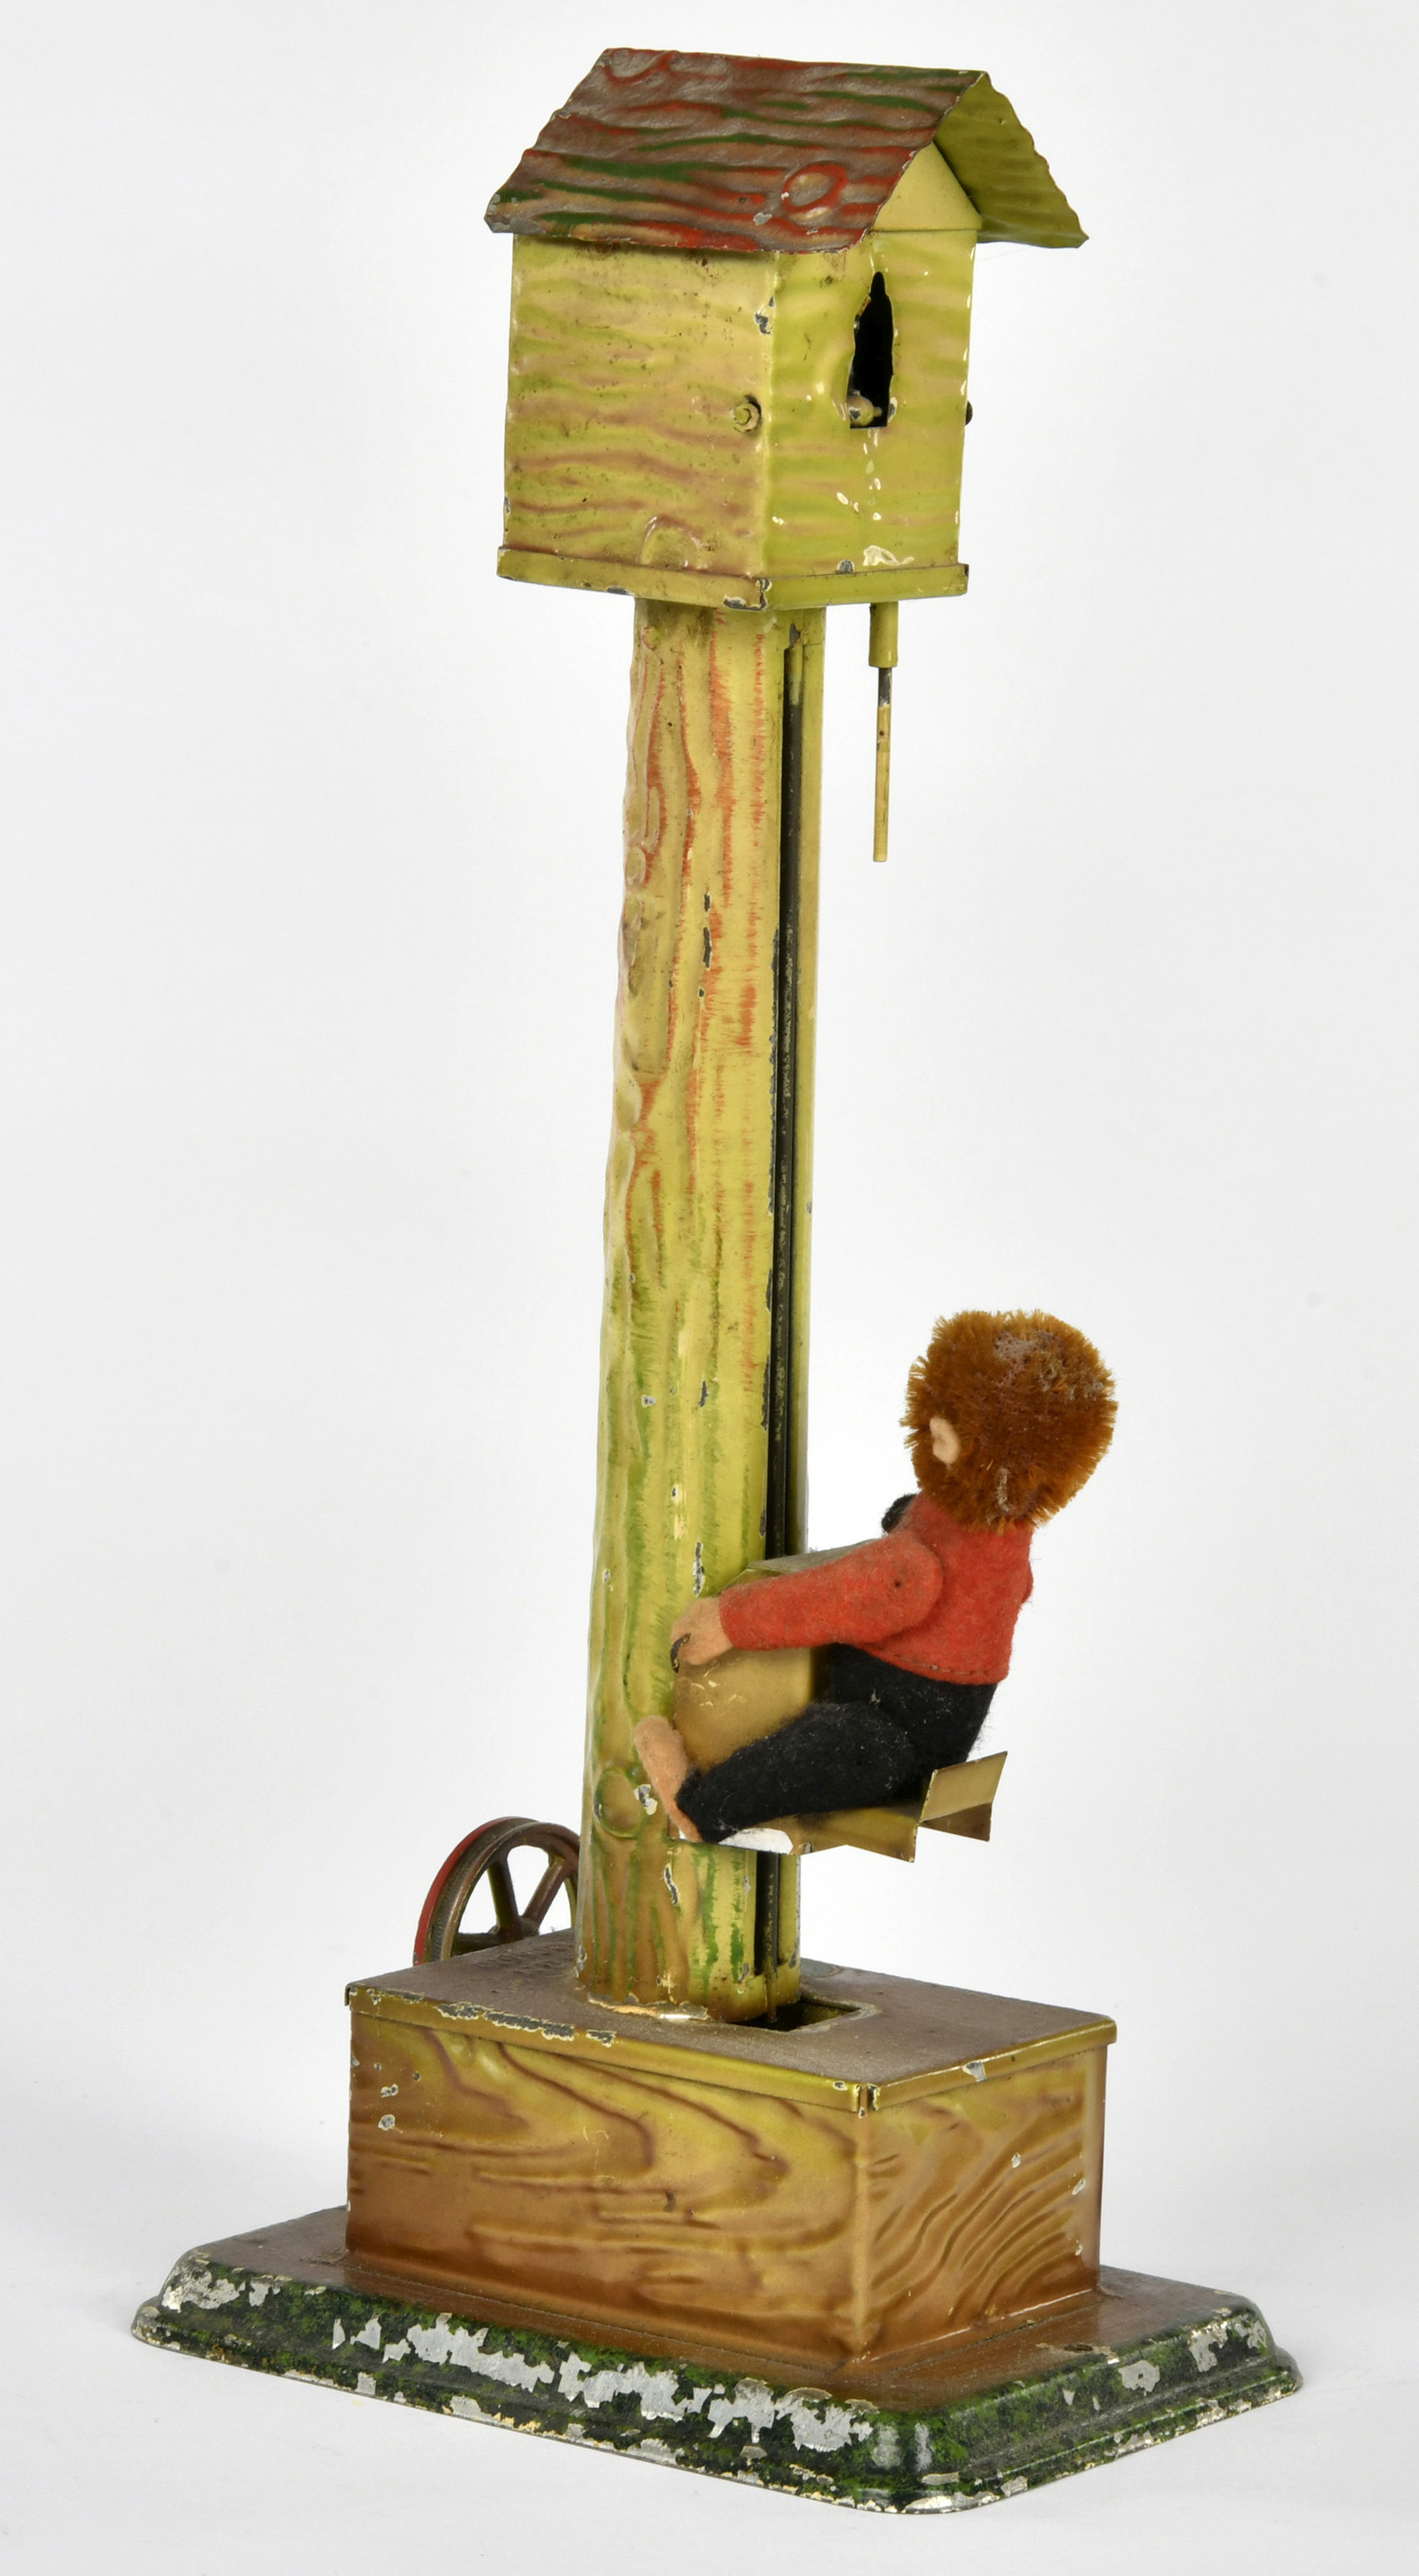 Doll, drive models, birdhouse with Schuco monkey, Germany pw, 30cm, paint d., C 2 - Image 2 of 3